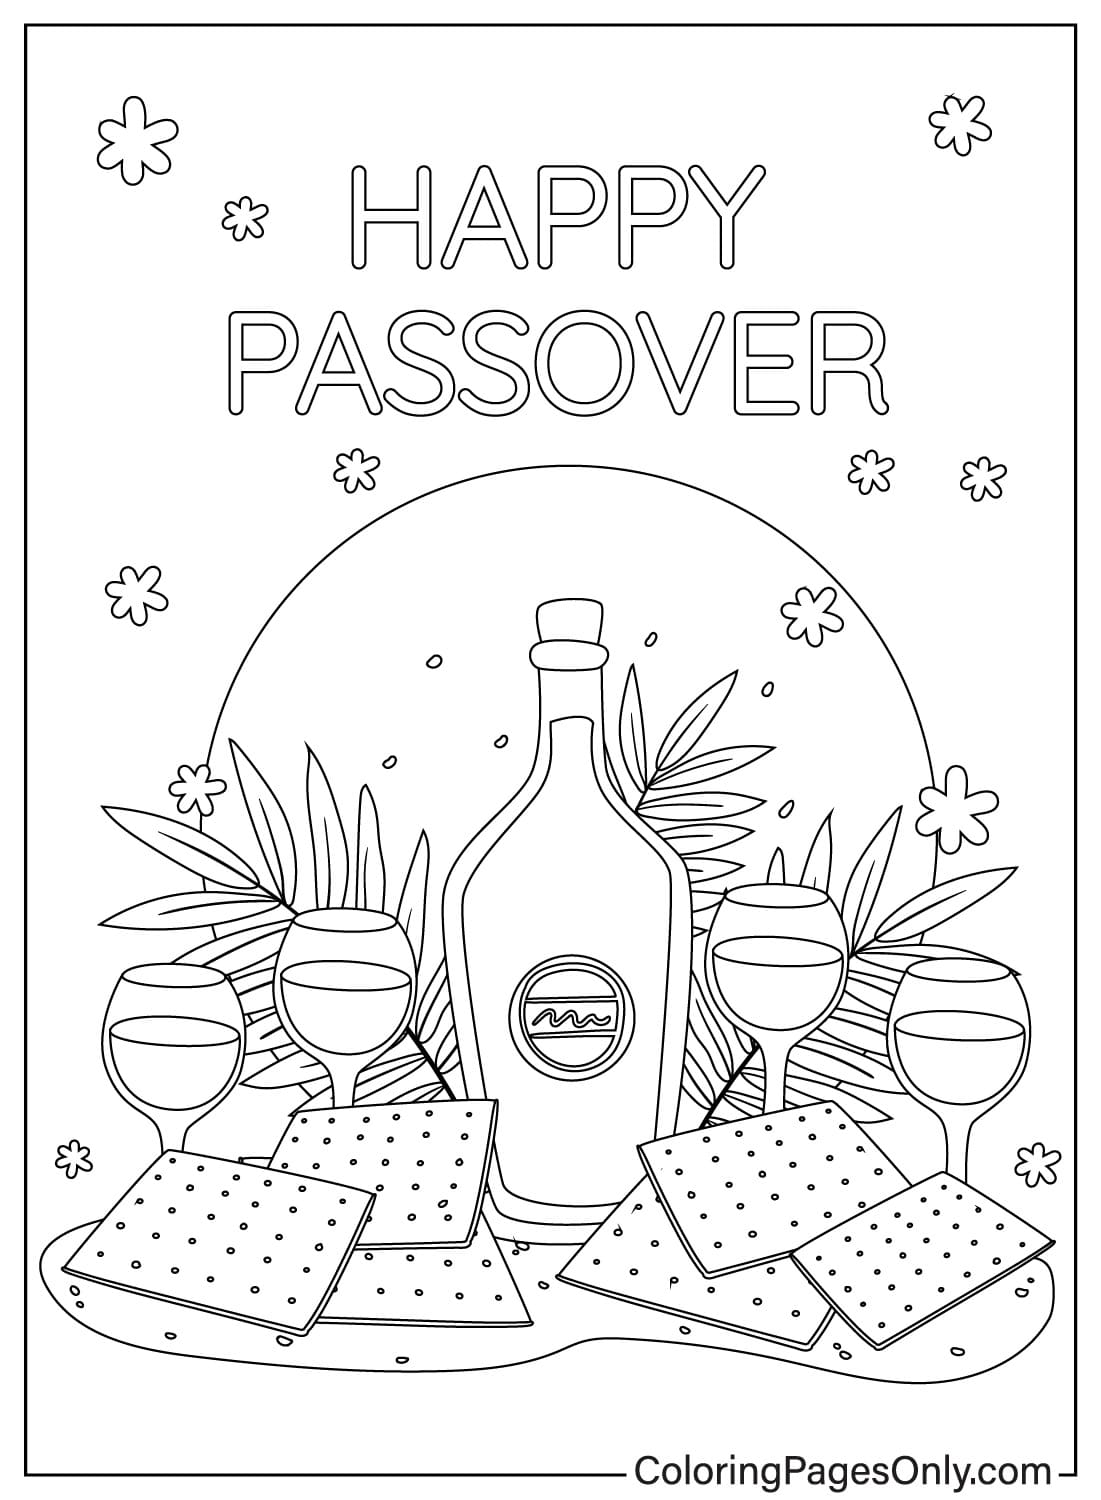 Happy Passover Coloring Page for Kids from Passover